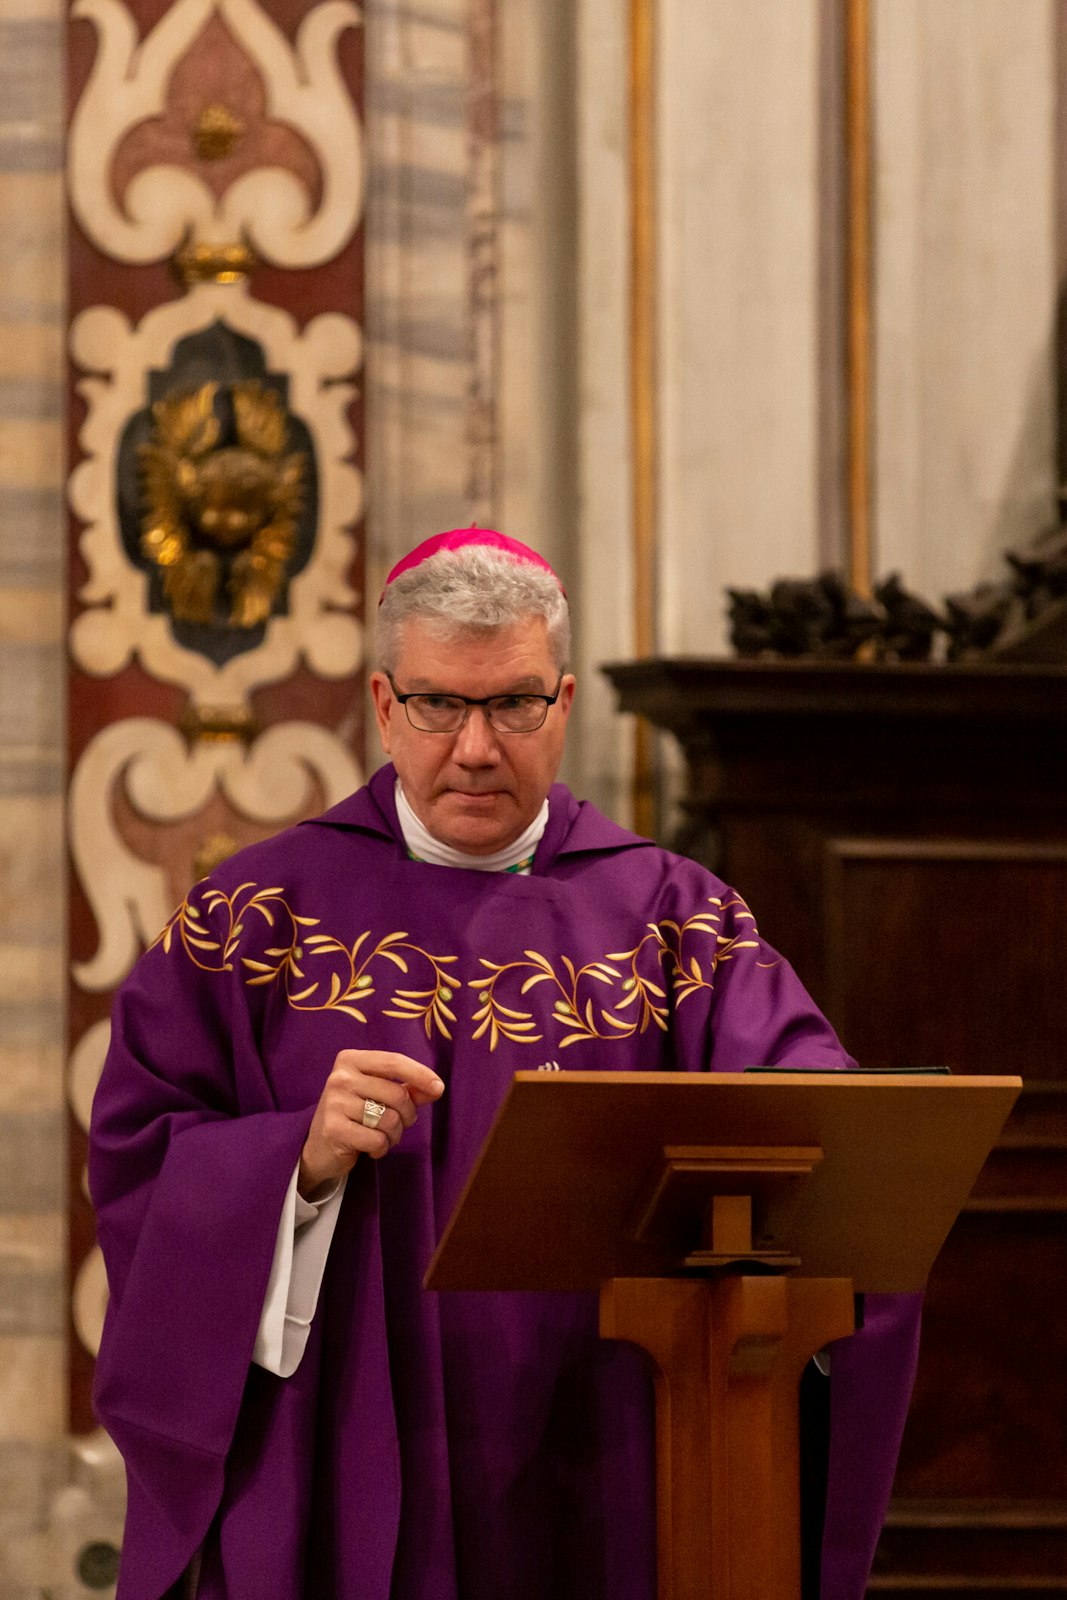 Bishop Monforton gives the homily during Mass with members of the United States Conference of Catholic Bishops' Region VI who gathered at the Basilica of St. John Lateran on Dec. 10, 2019, during their “ad Limina Apostolorum” visit to the Holy See. (Photo courtesy of Catholic News Agency)